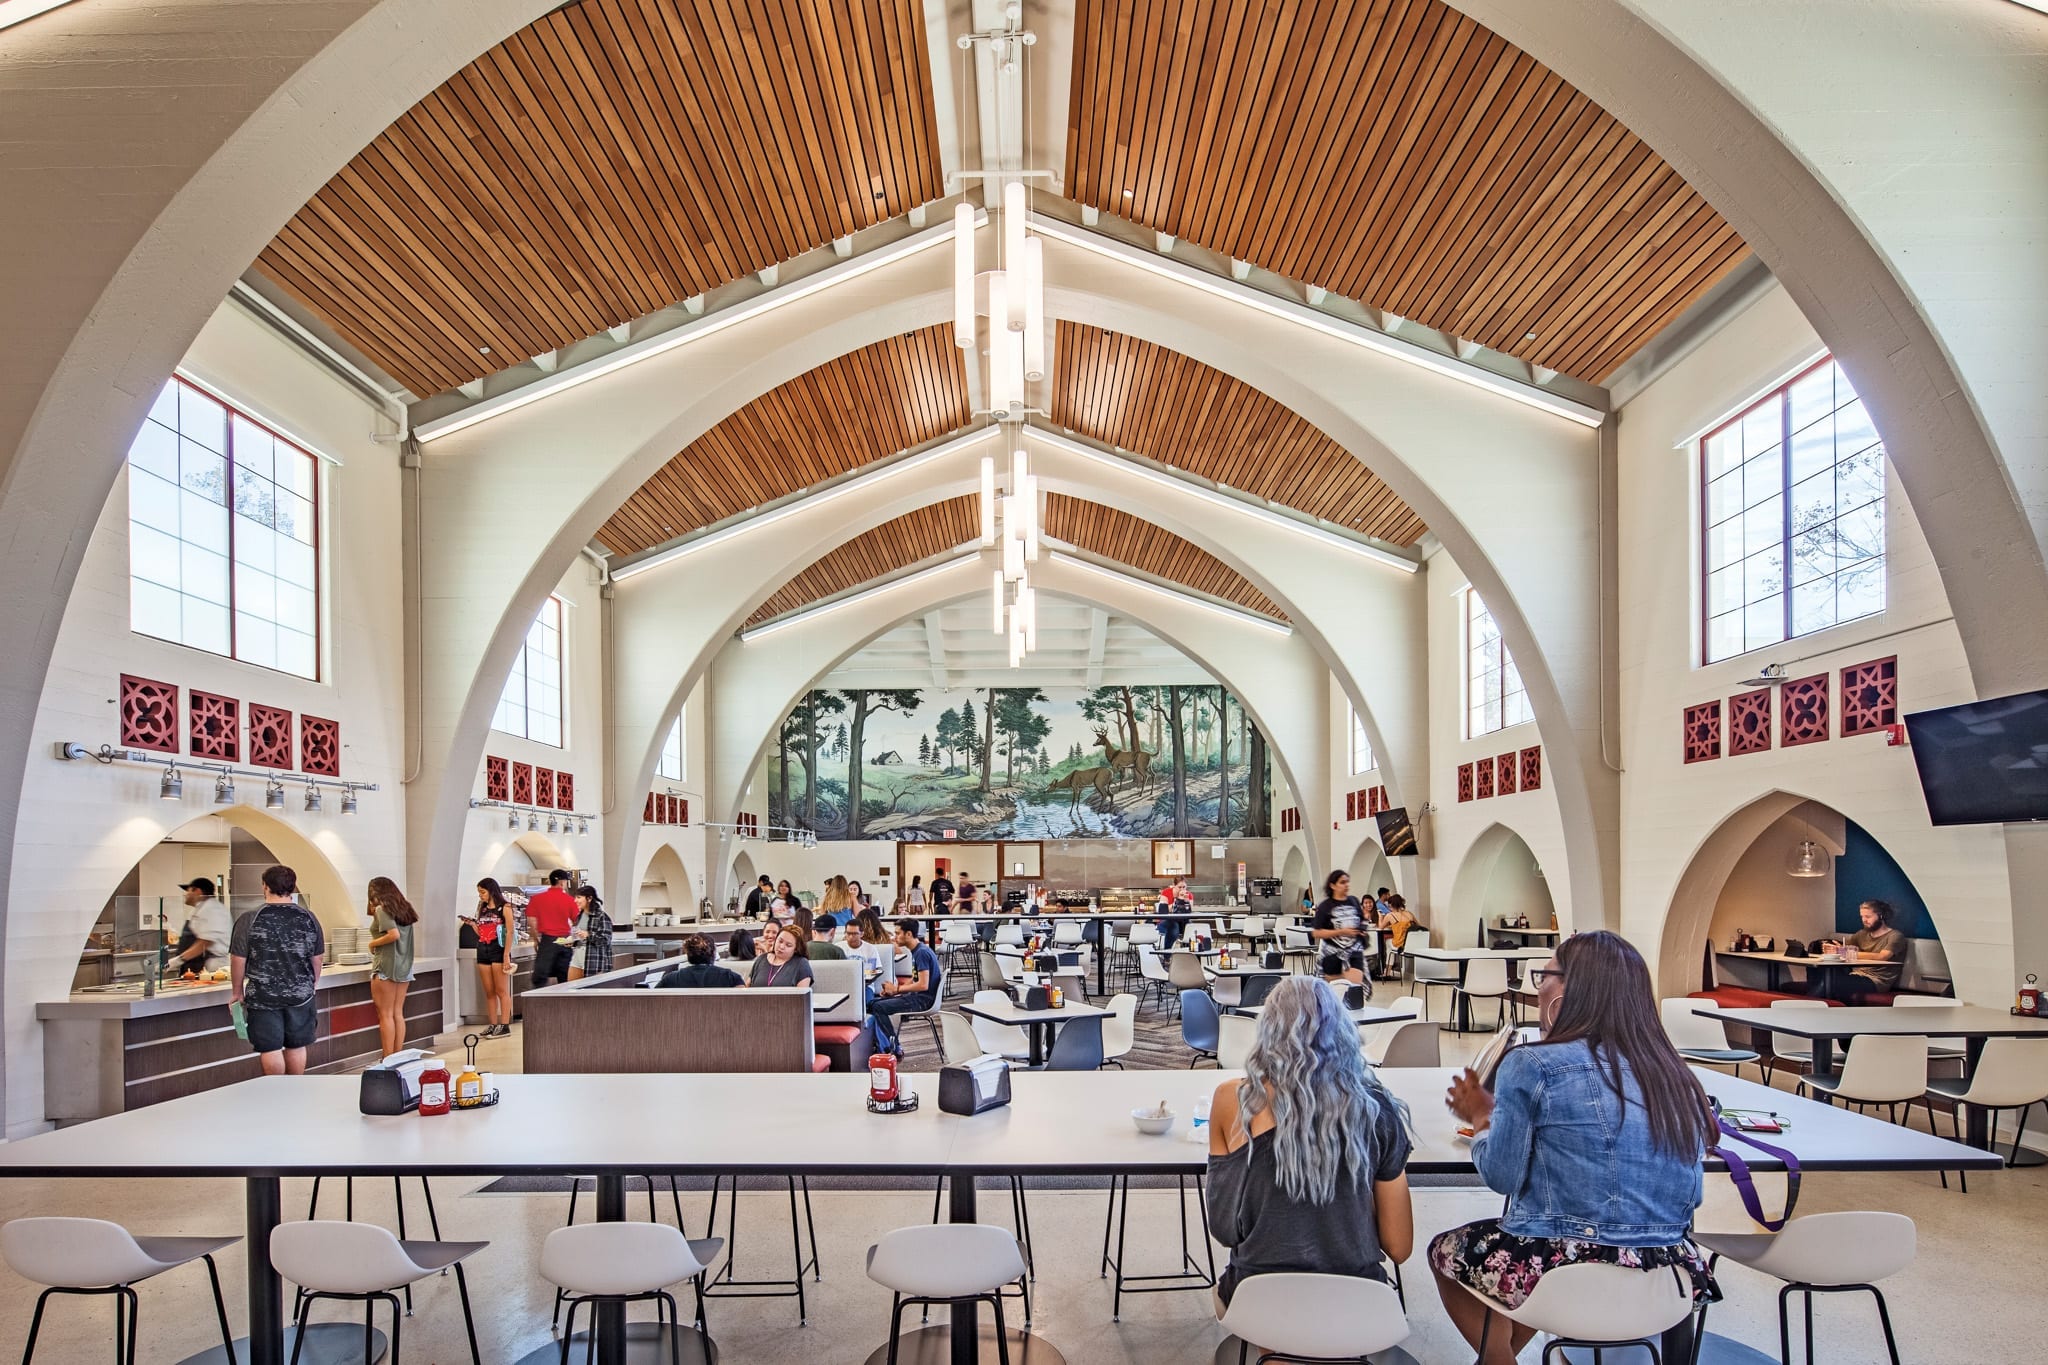 CSU Channel Islands dining with high vaulted ceilings.